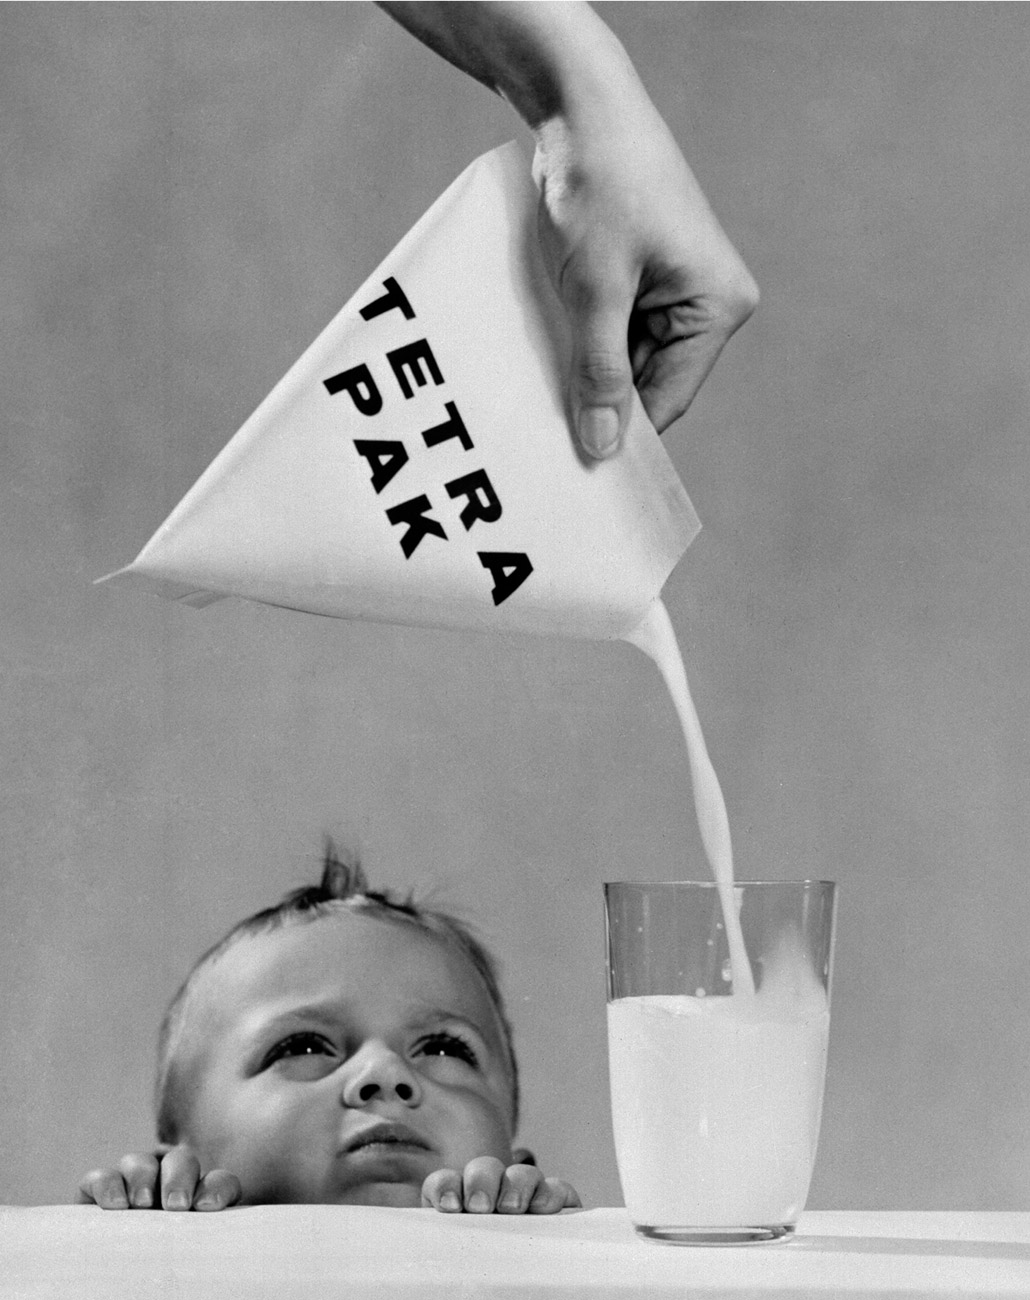 A nineteen fifties promotional image for Tetra Pak, featuring a baby gazing at a glass of milk being poured from a packet.